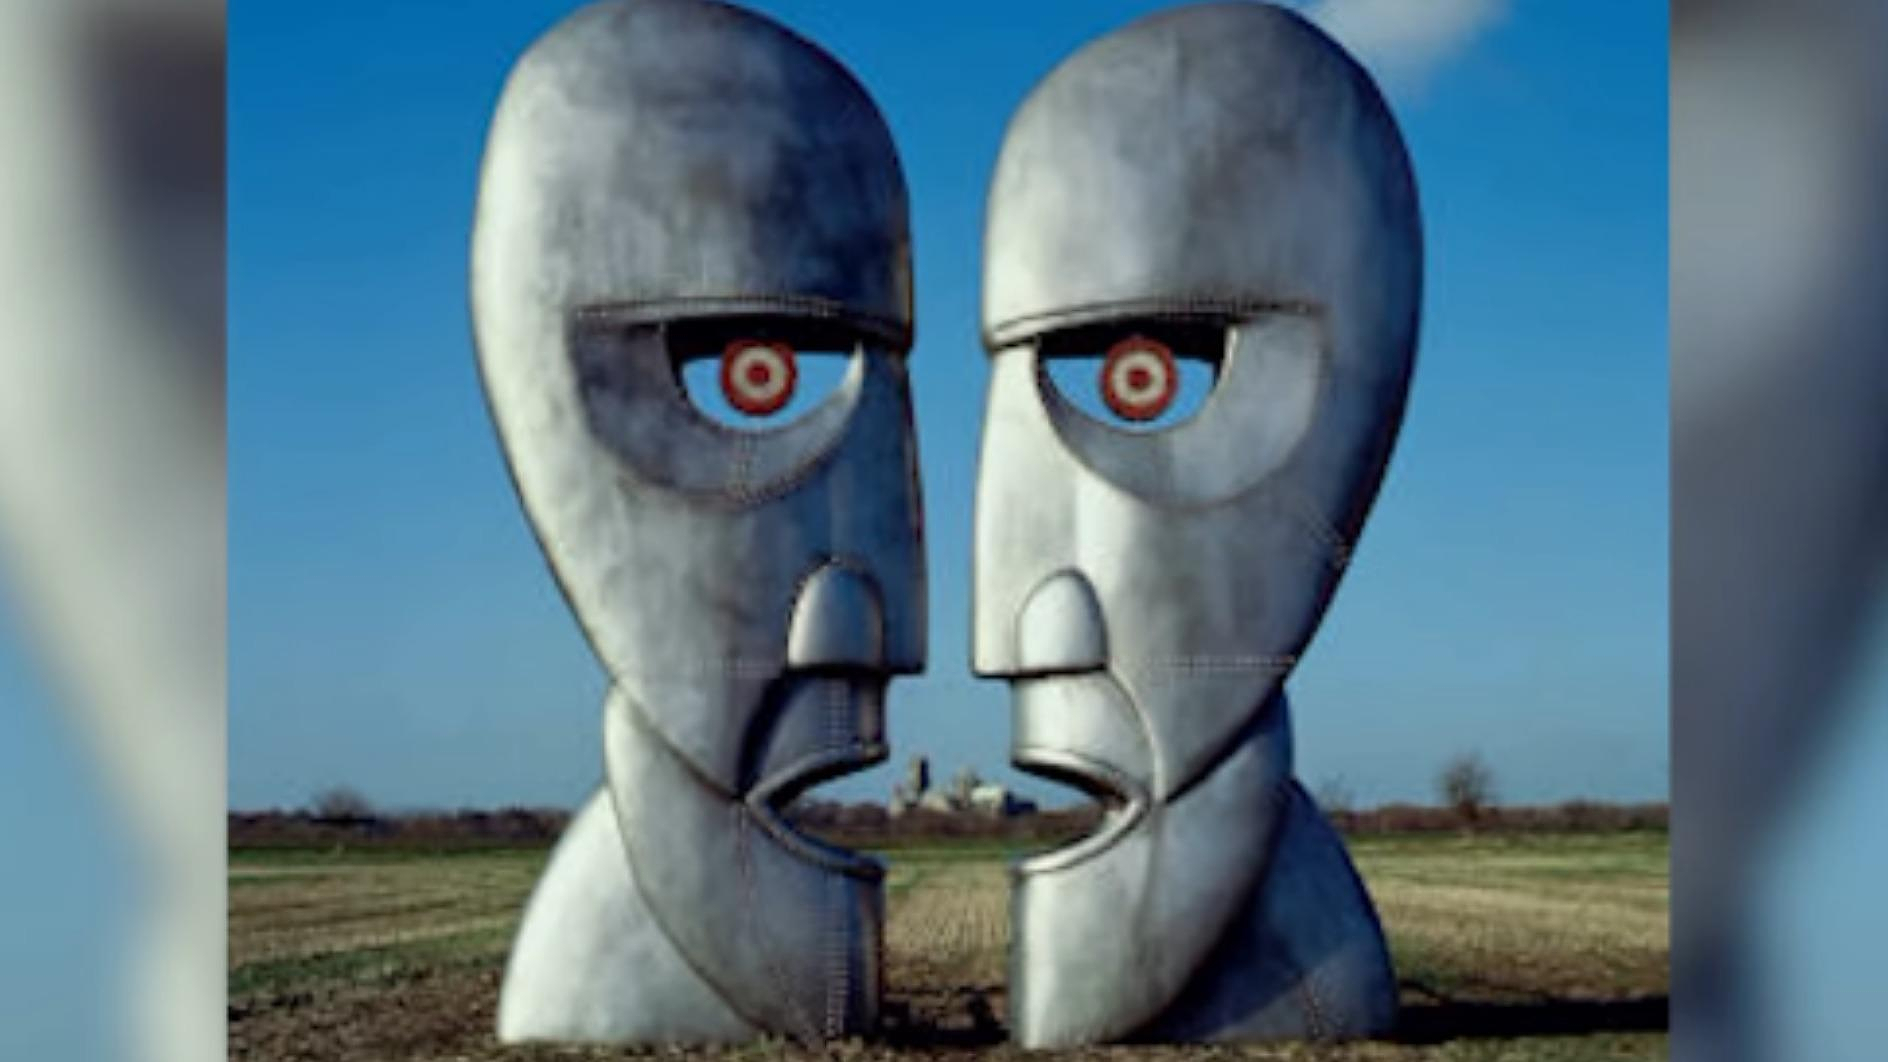 Pink Floyd's The Division Bell album celebrates its 30th anniversary